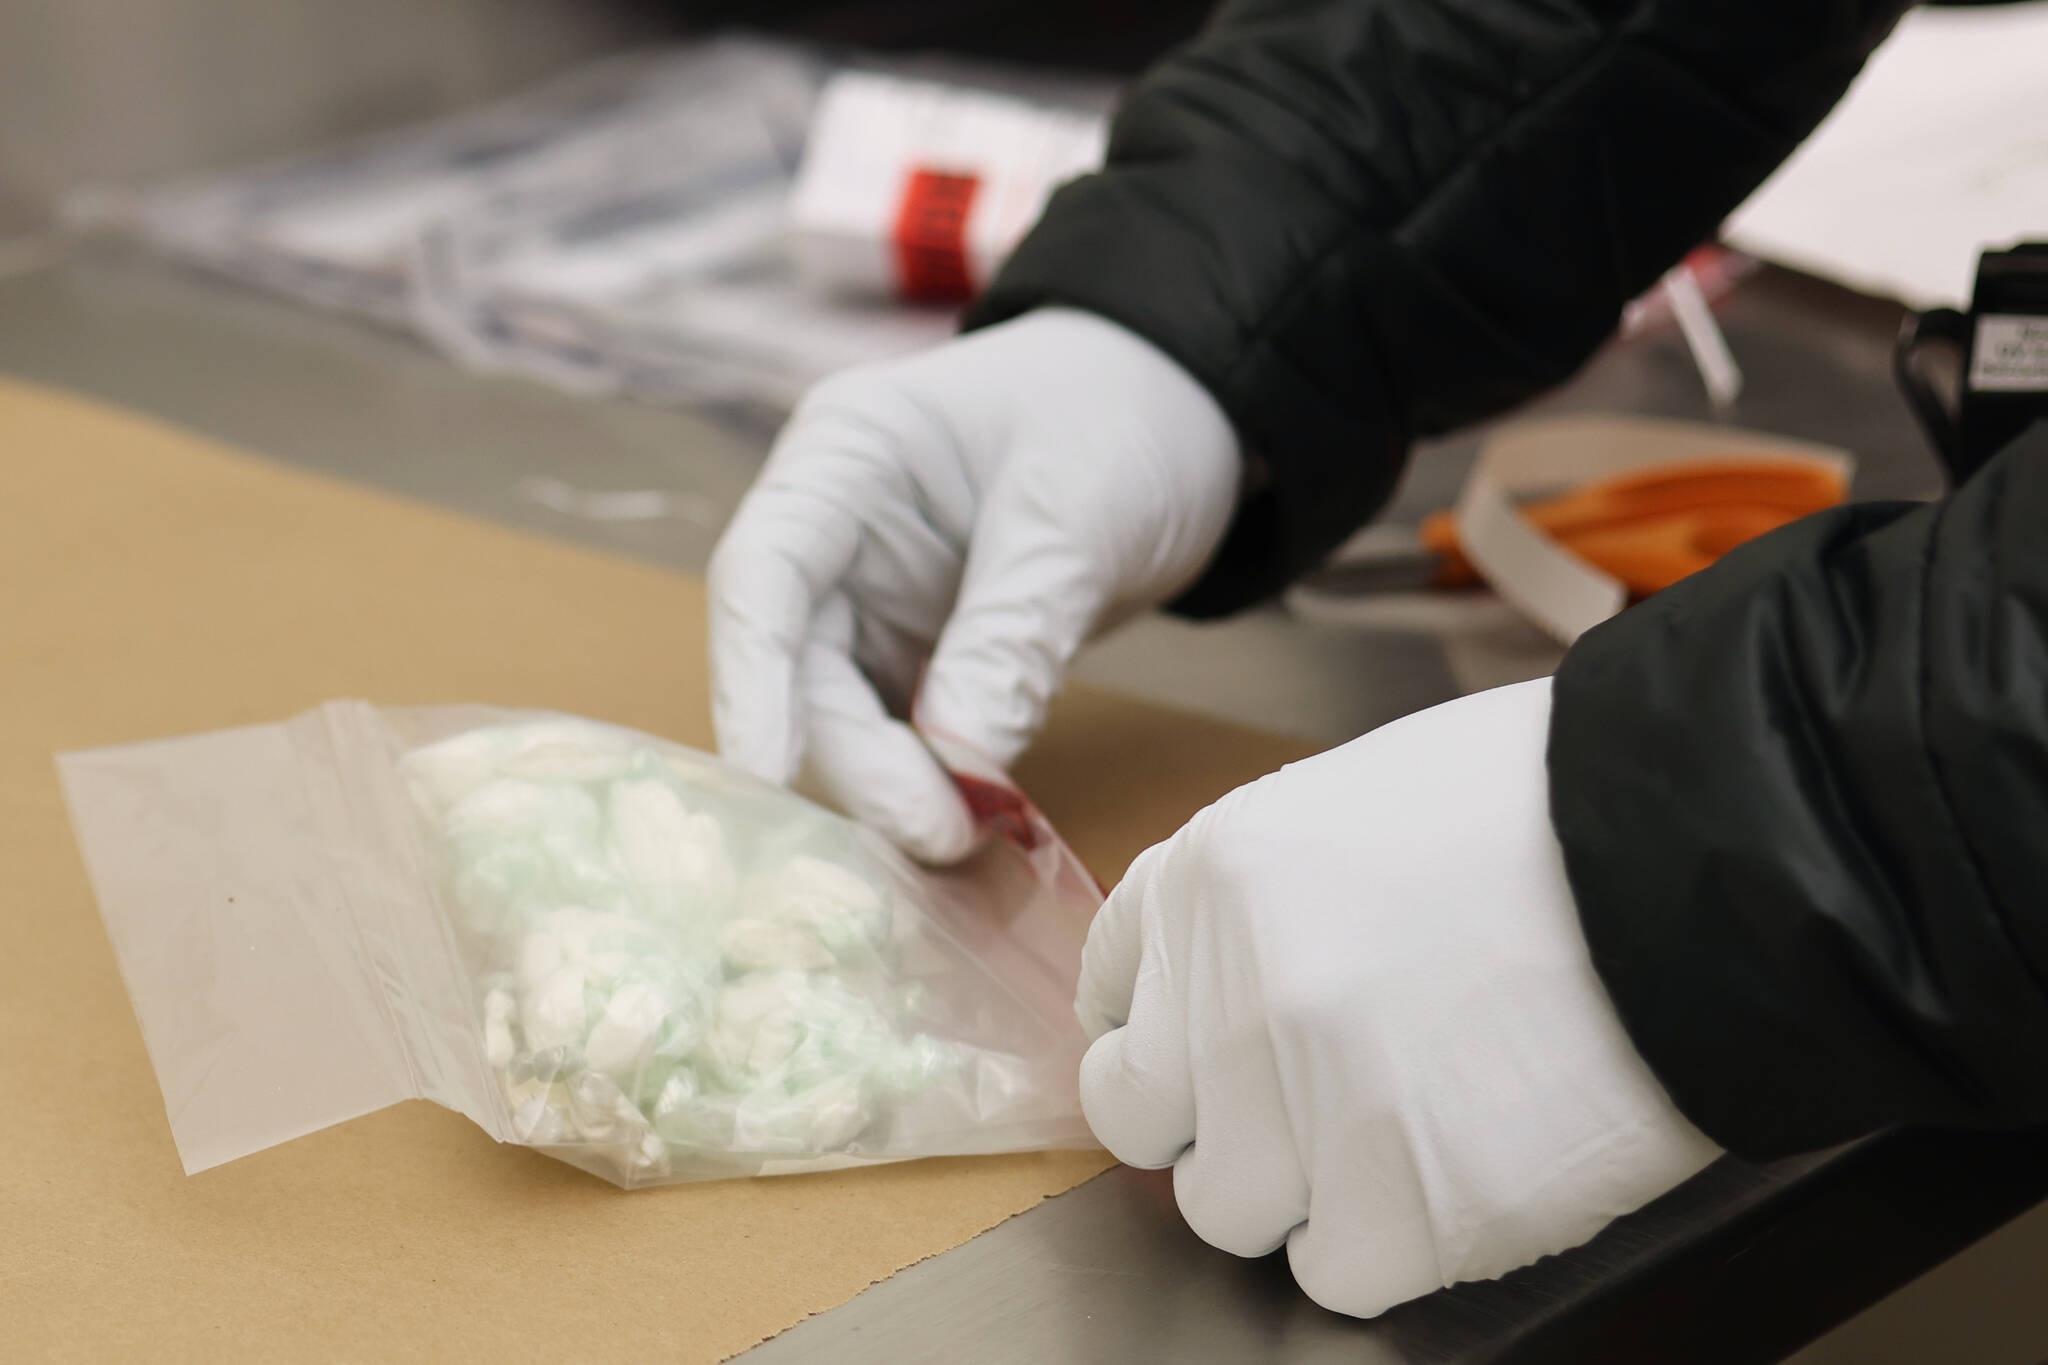 A tag is place on a evidence bag containing small baggies of drugs seized by the Juneau Police Department. (Ben Hohenstatt / Juneau Empire)